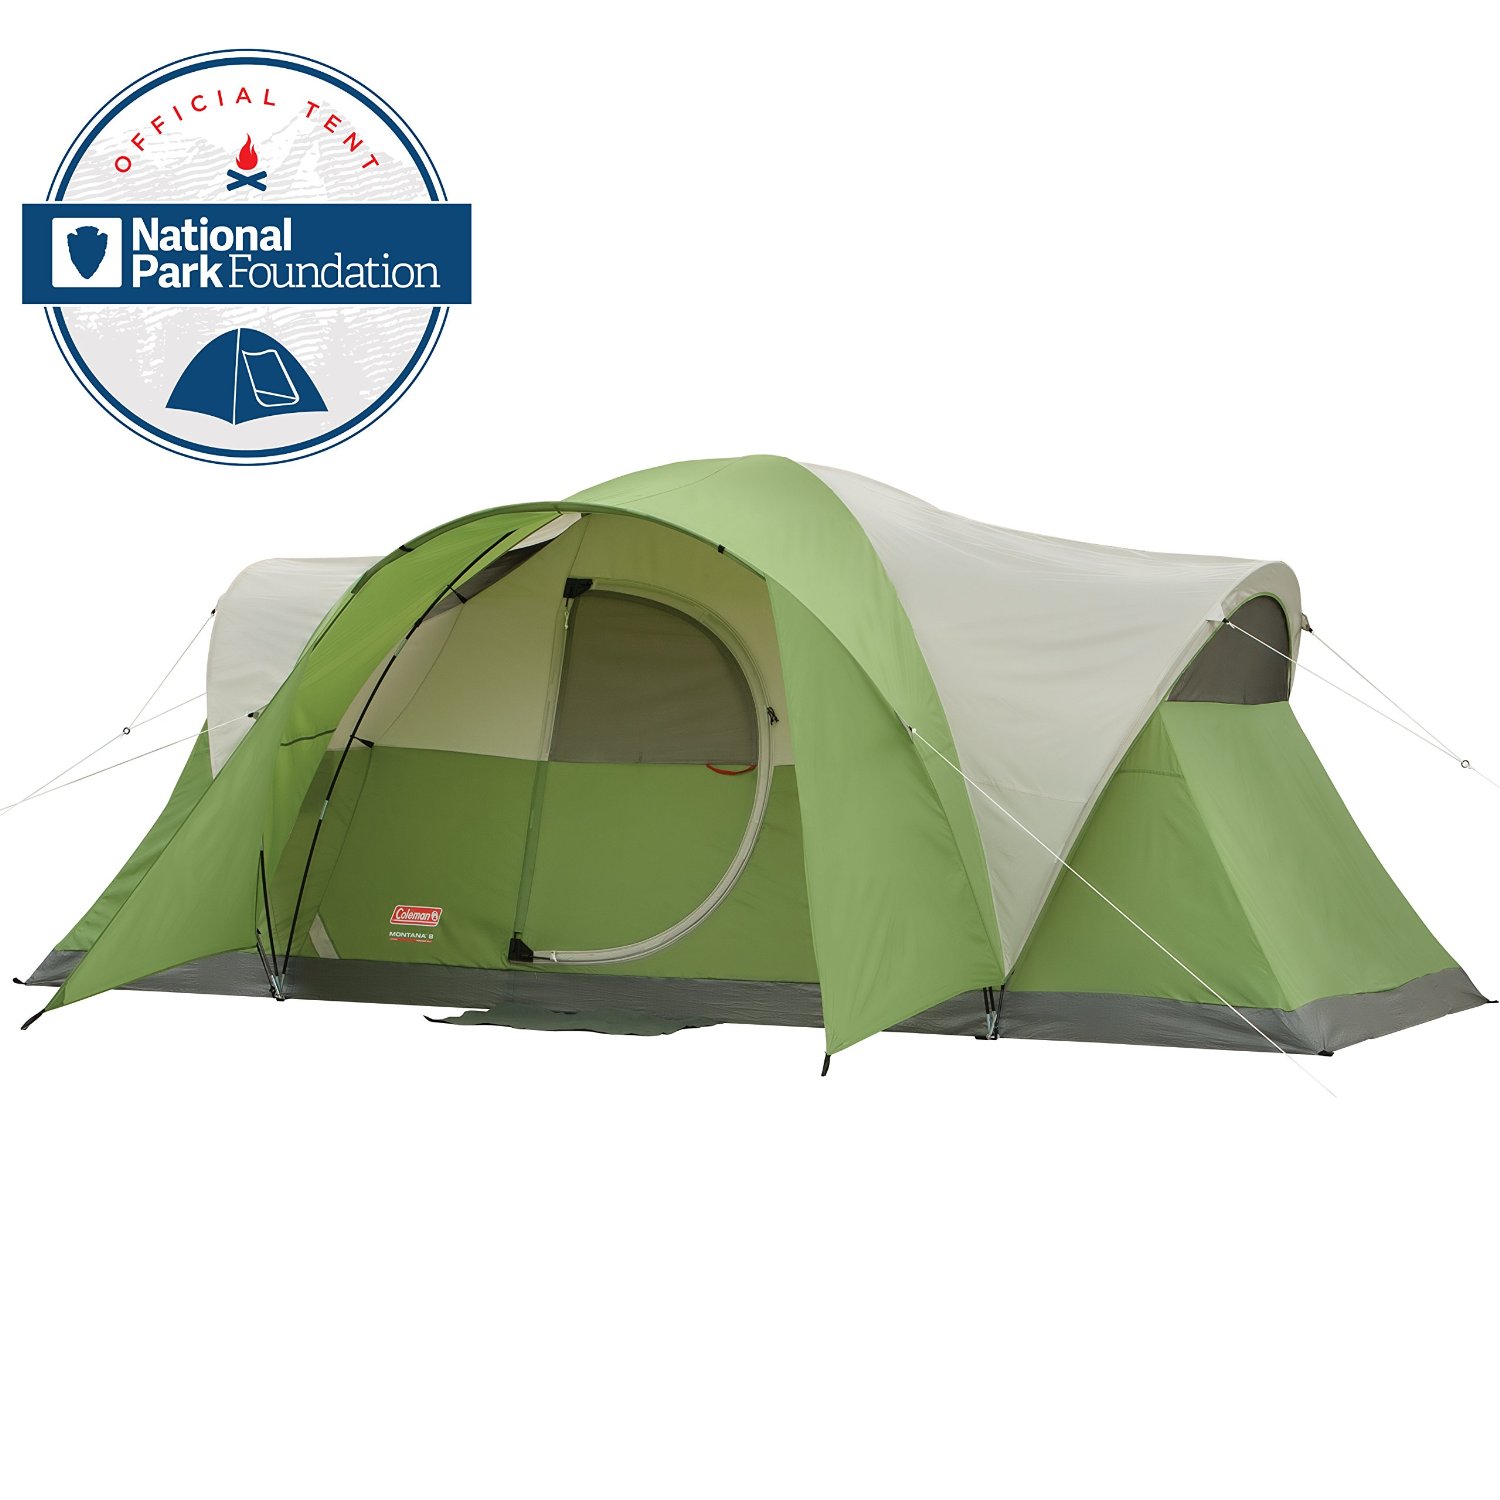 Prime Day Deal – Coleman Montana 8-Person Tent – Just $67.99!